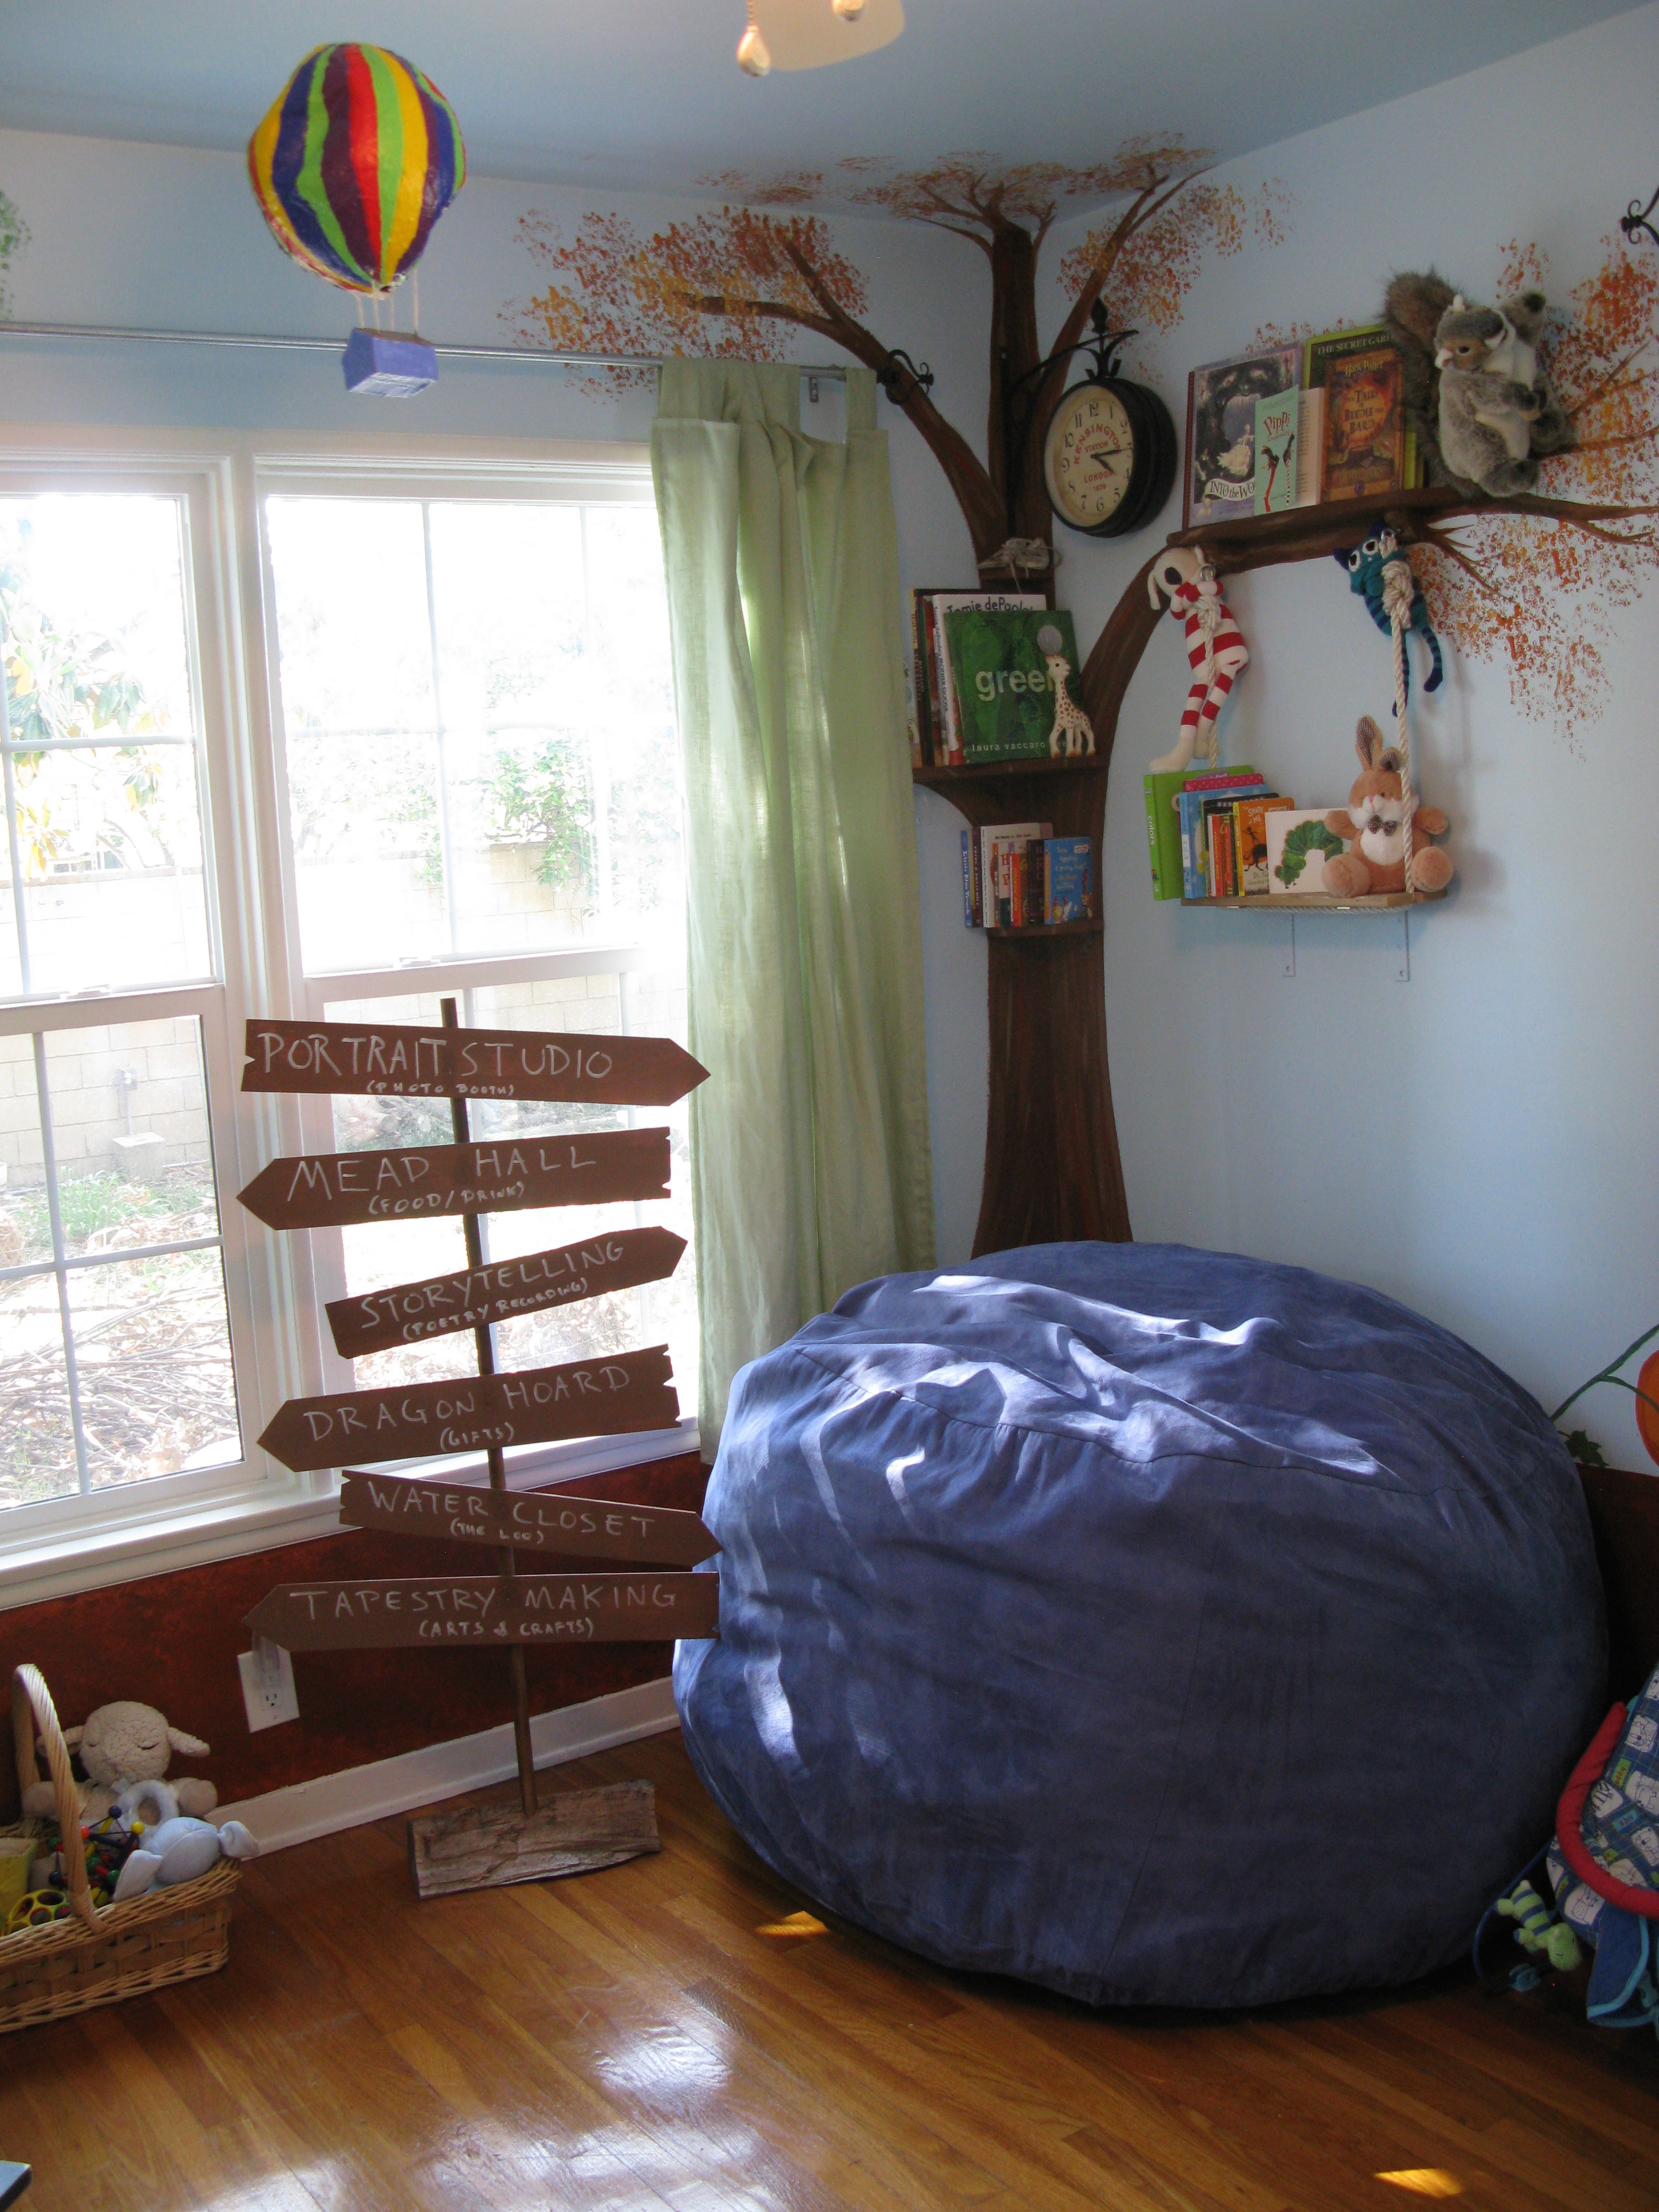 DIY forest glade in a children's room - from color concept to